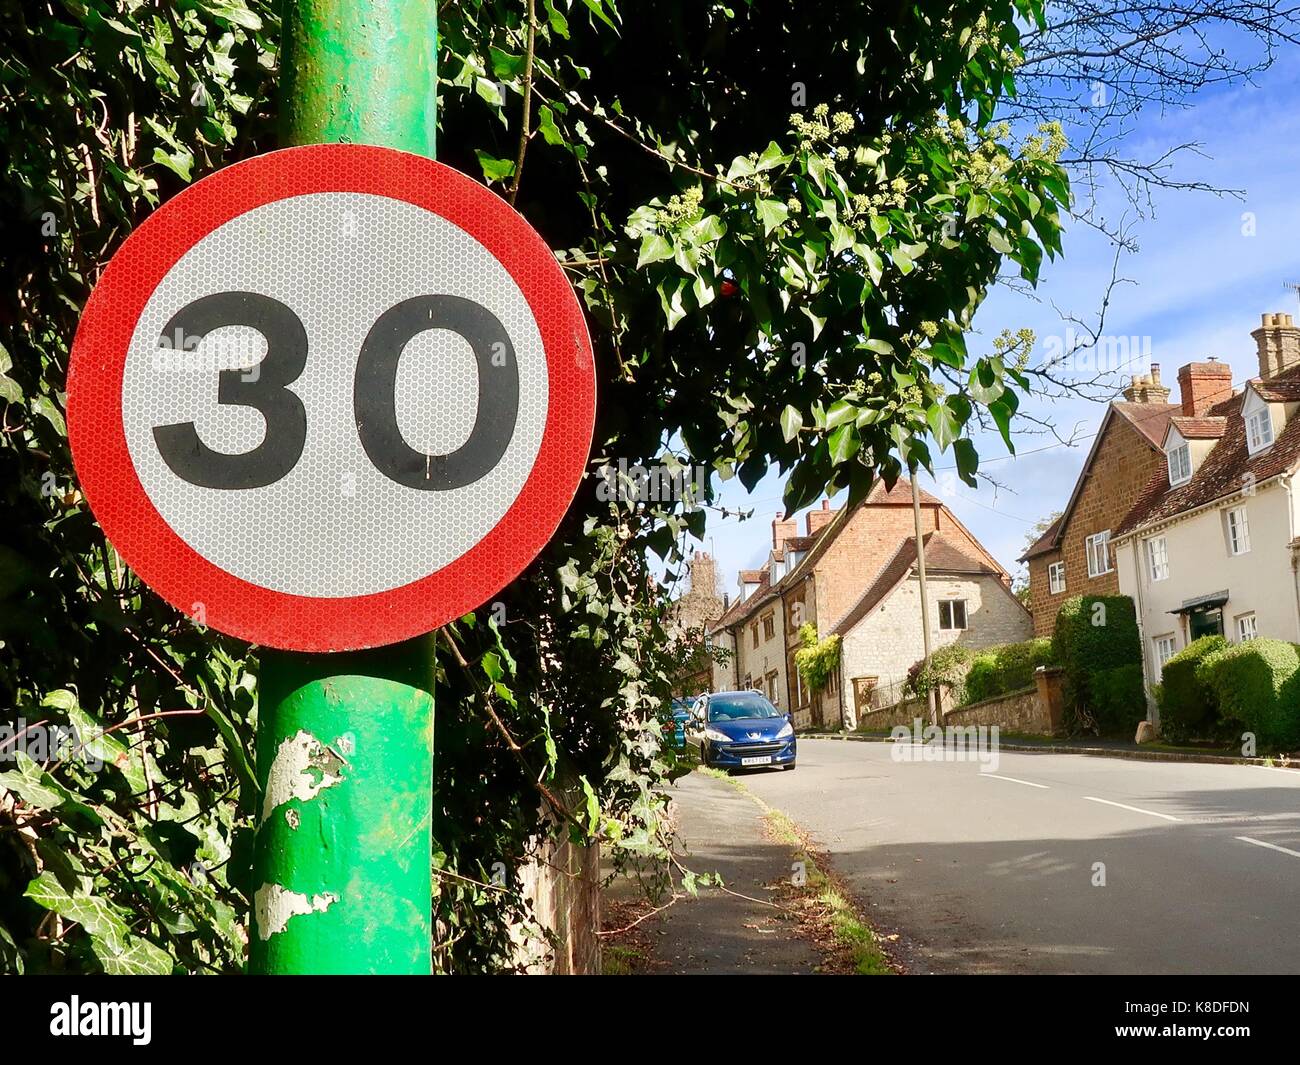 30 MPH speed limit sign on a green post in Kineton, Warwickshire, UK. Stock Photo